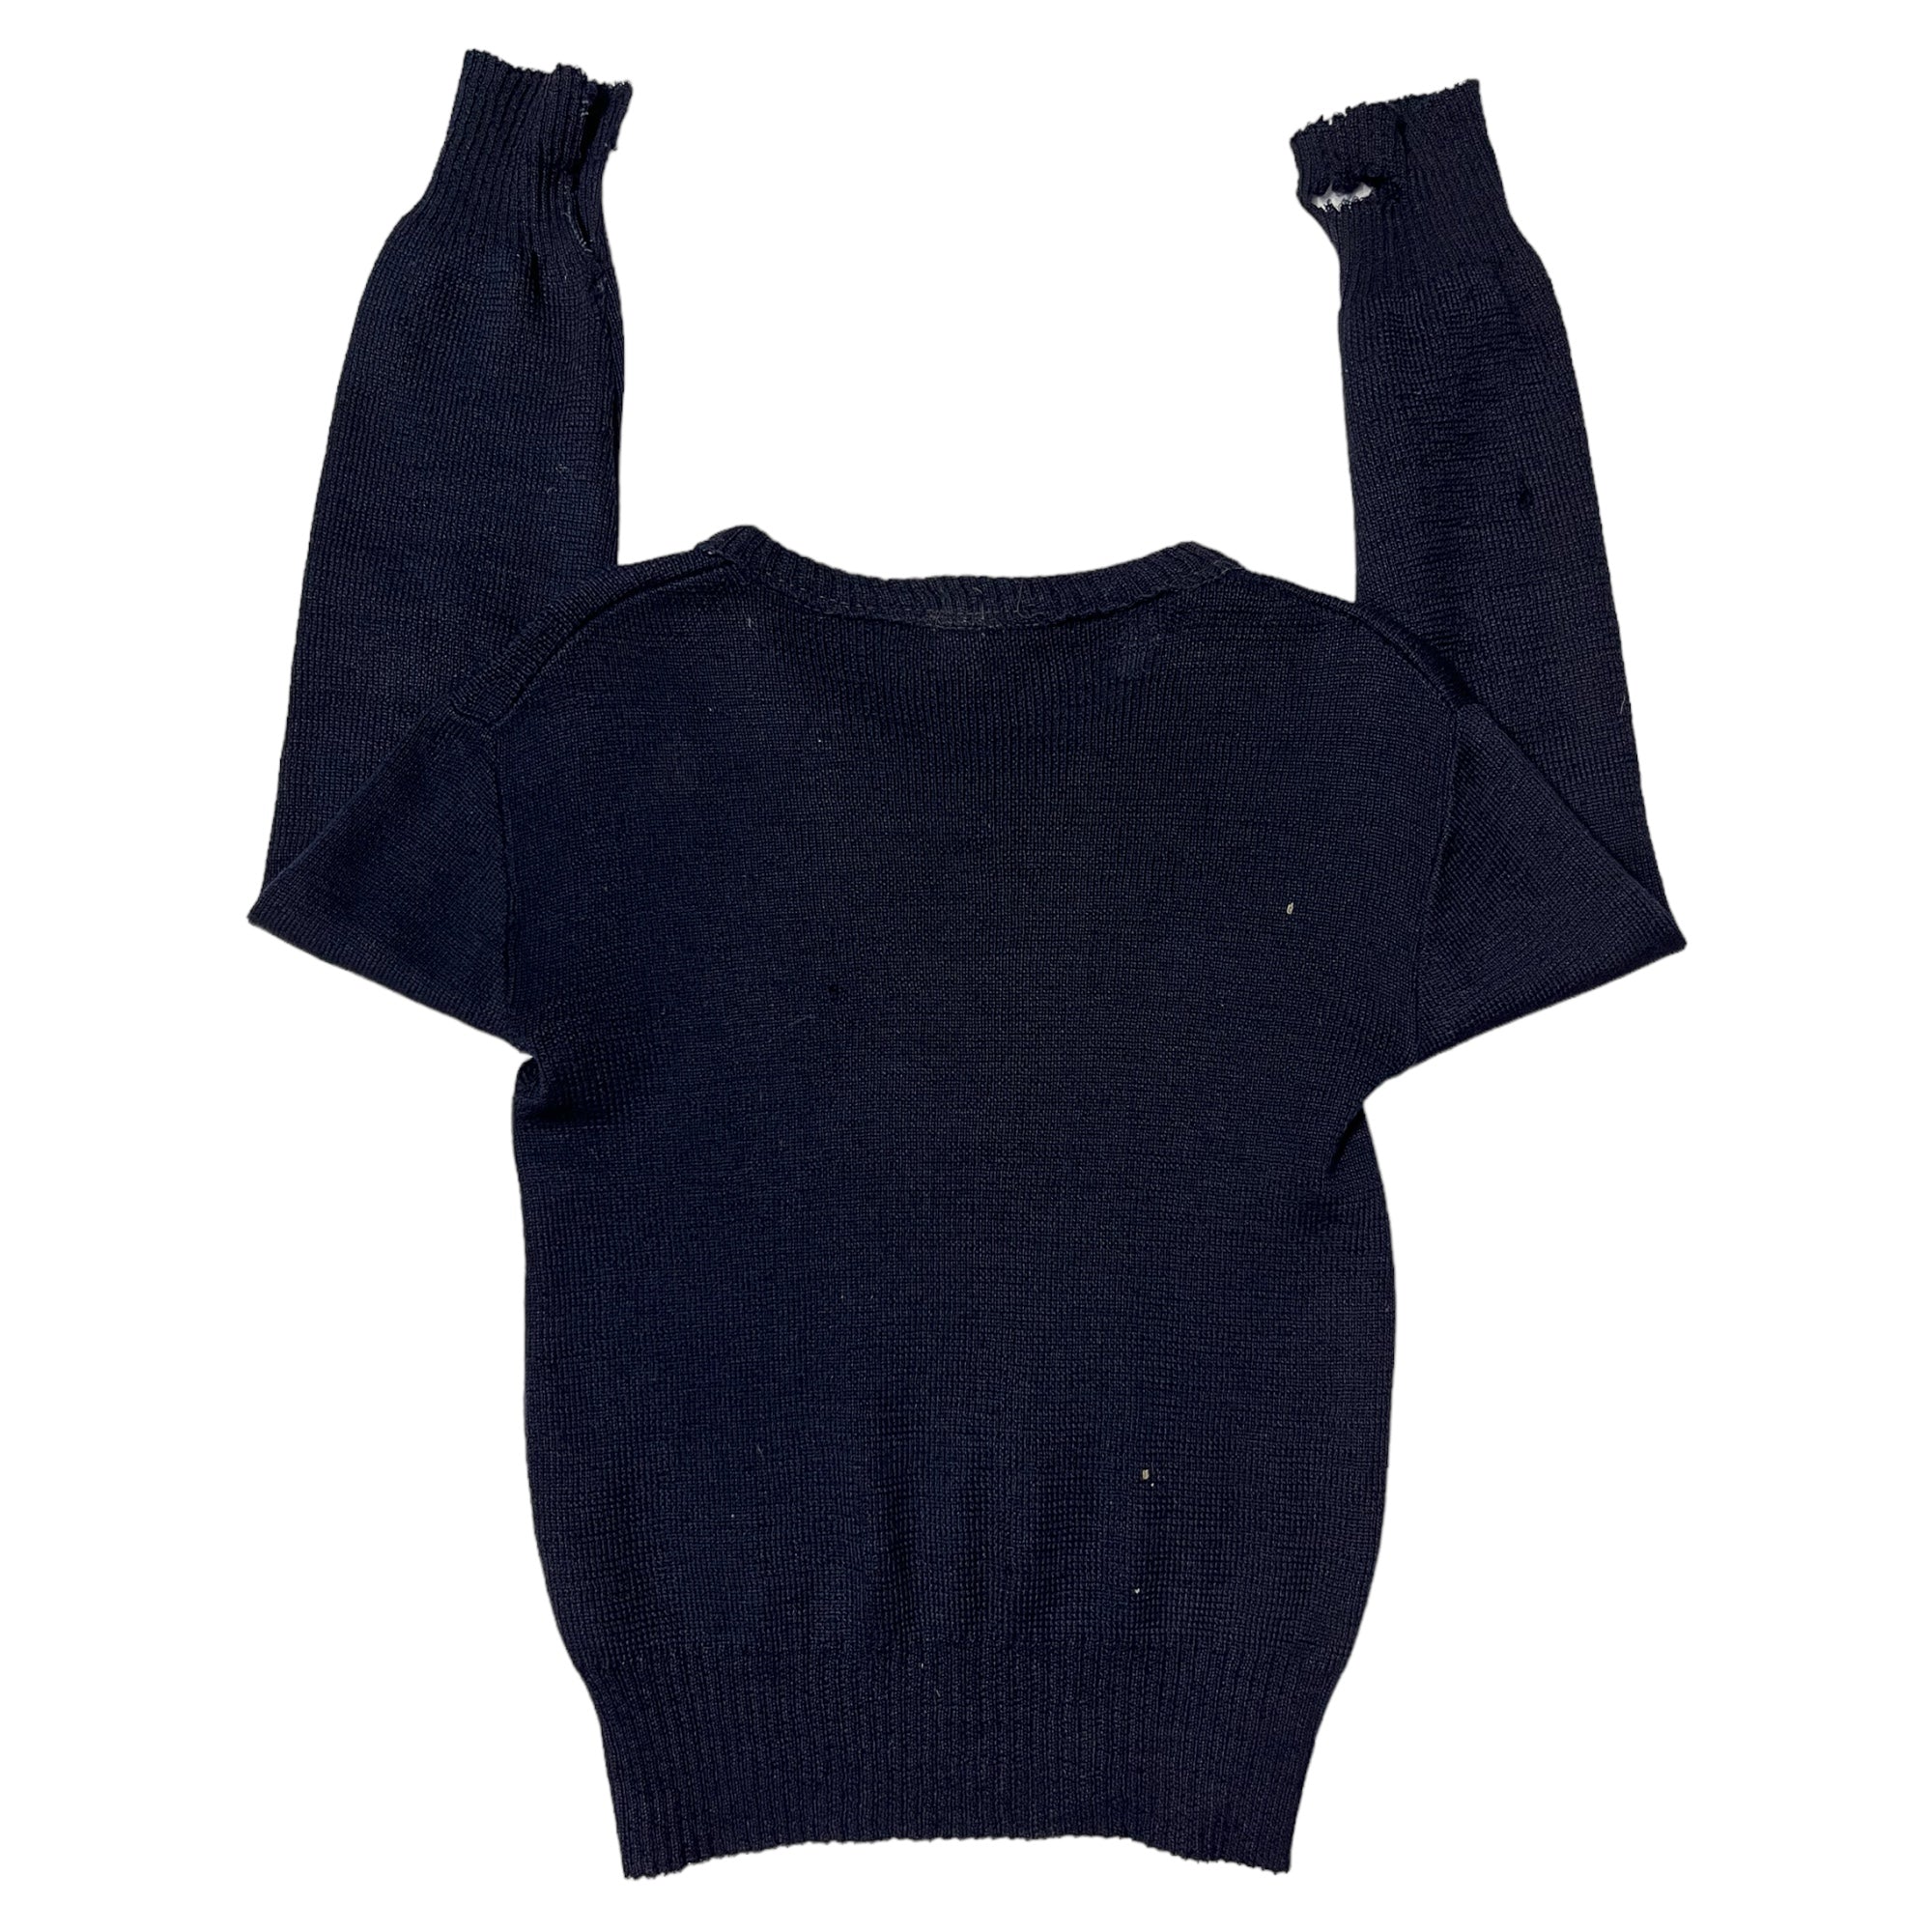 1930s French ‘Patron’ Stained Knit Sweater - Navy Blue - XS/S